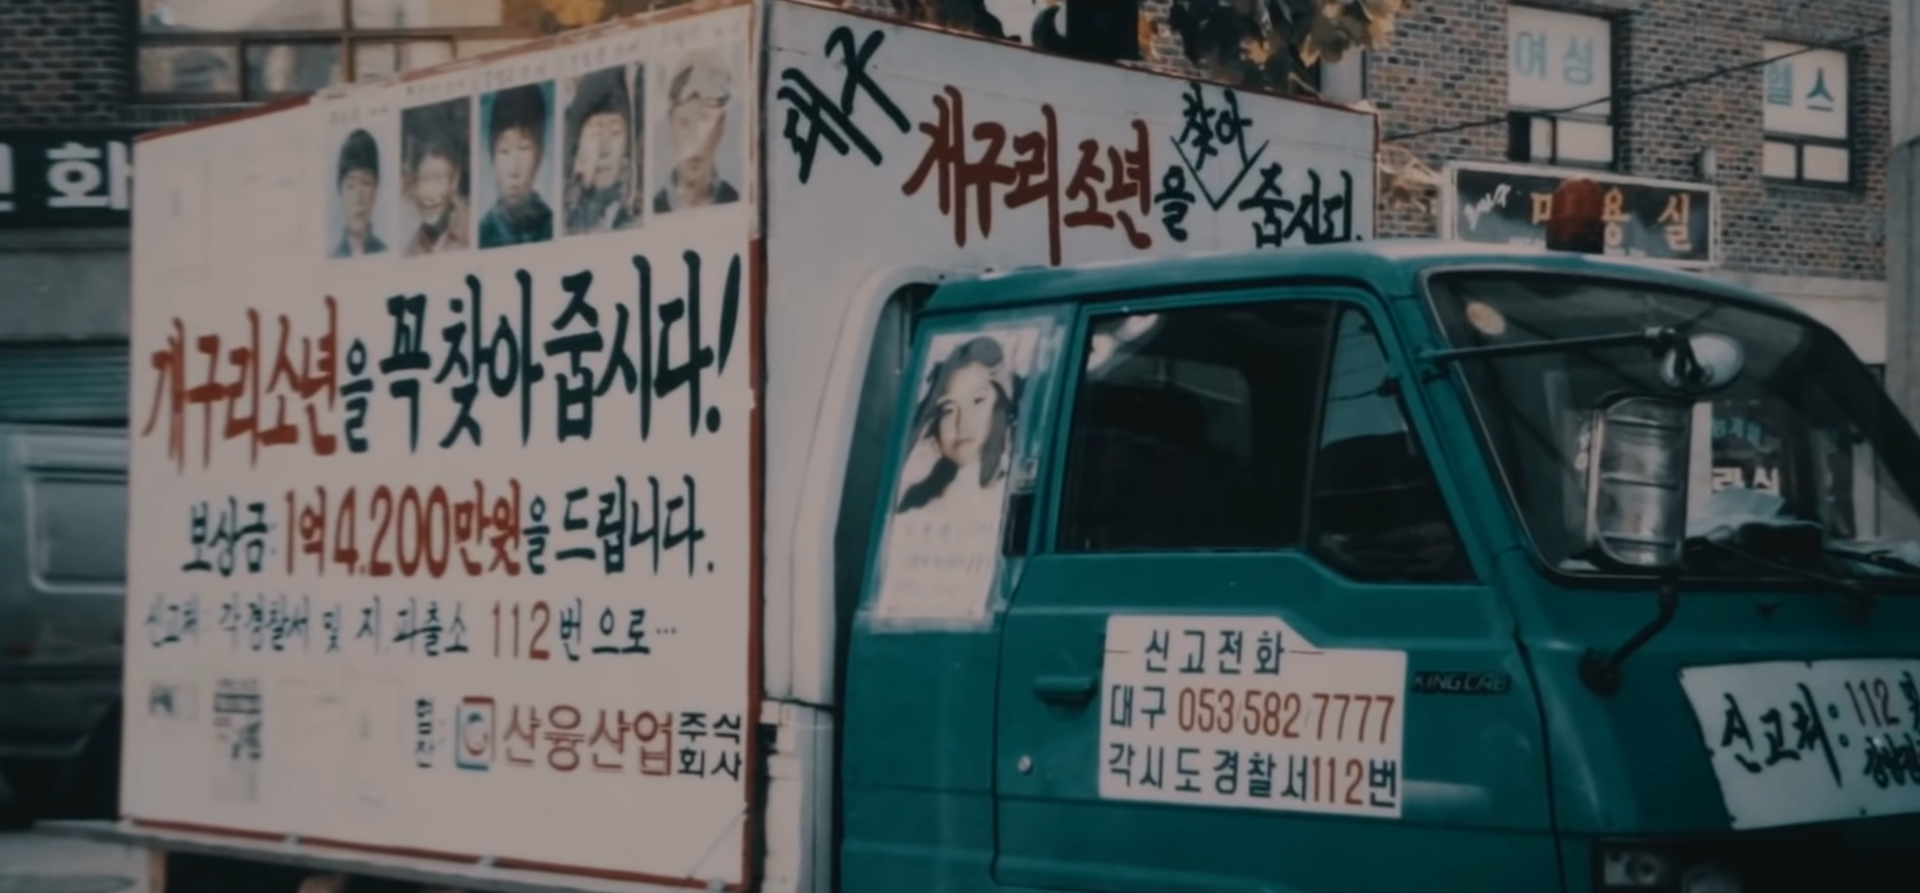 unsolved crimes in korea - searching for the frog boys